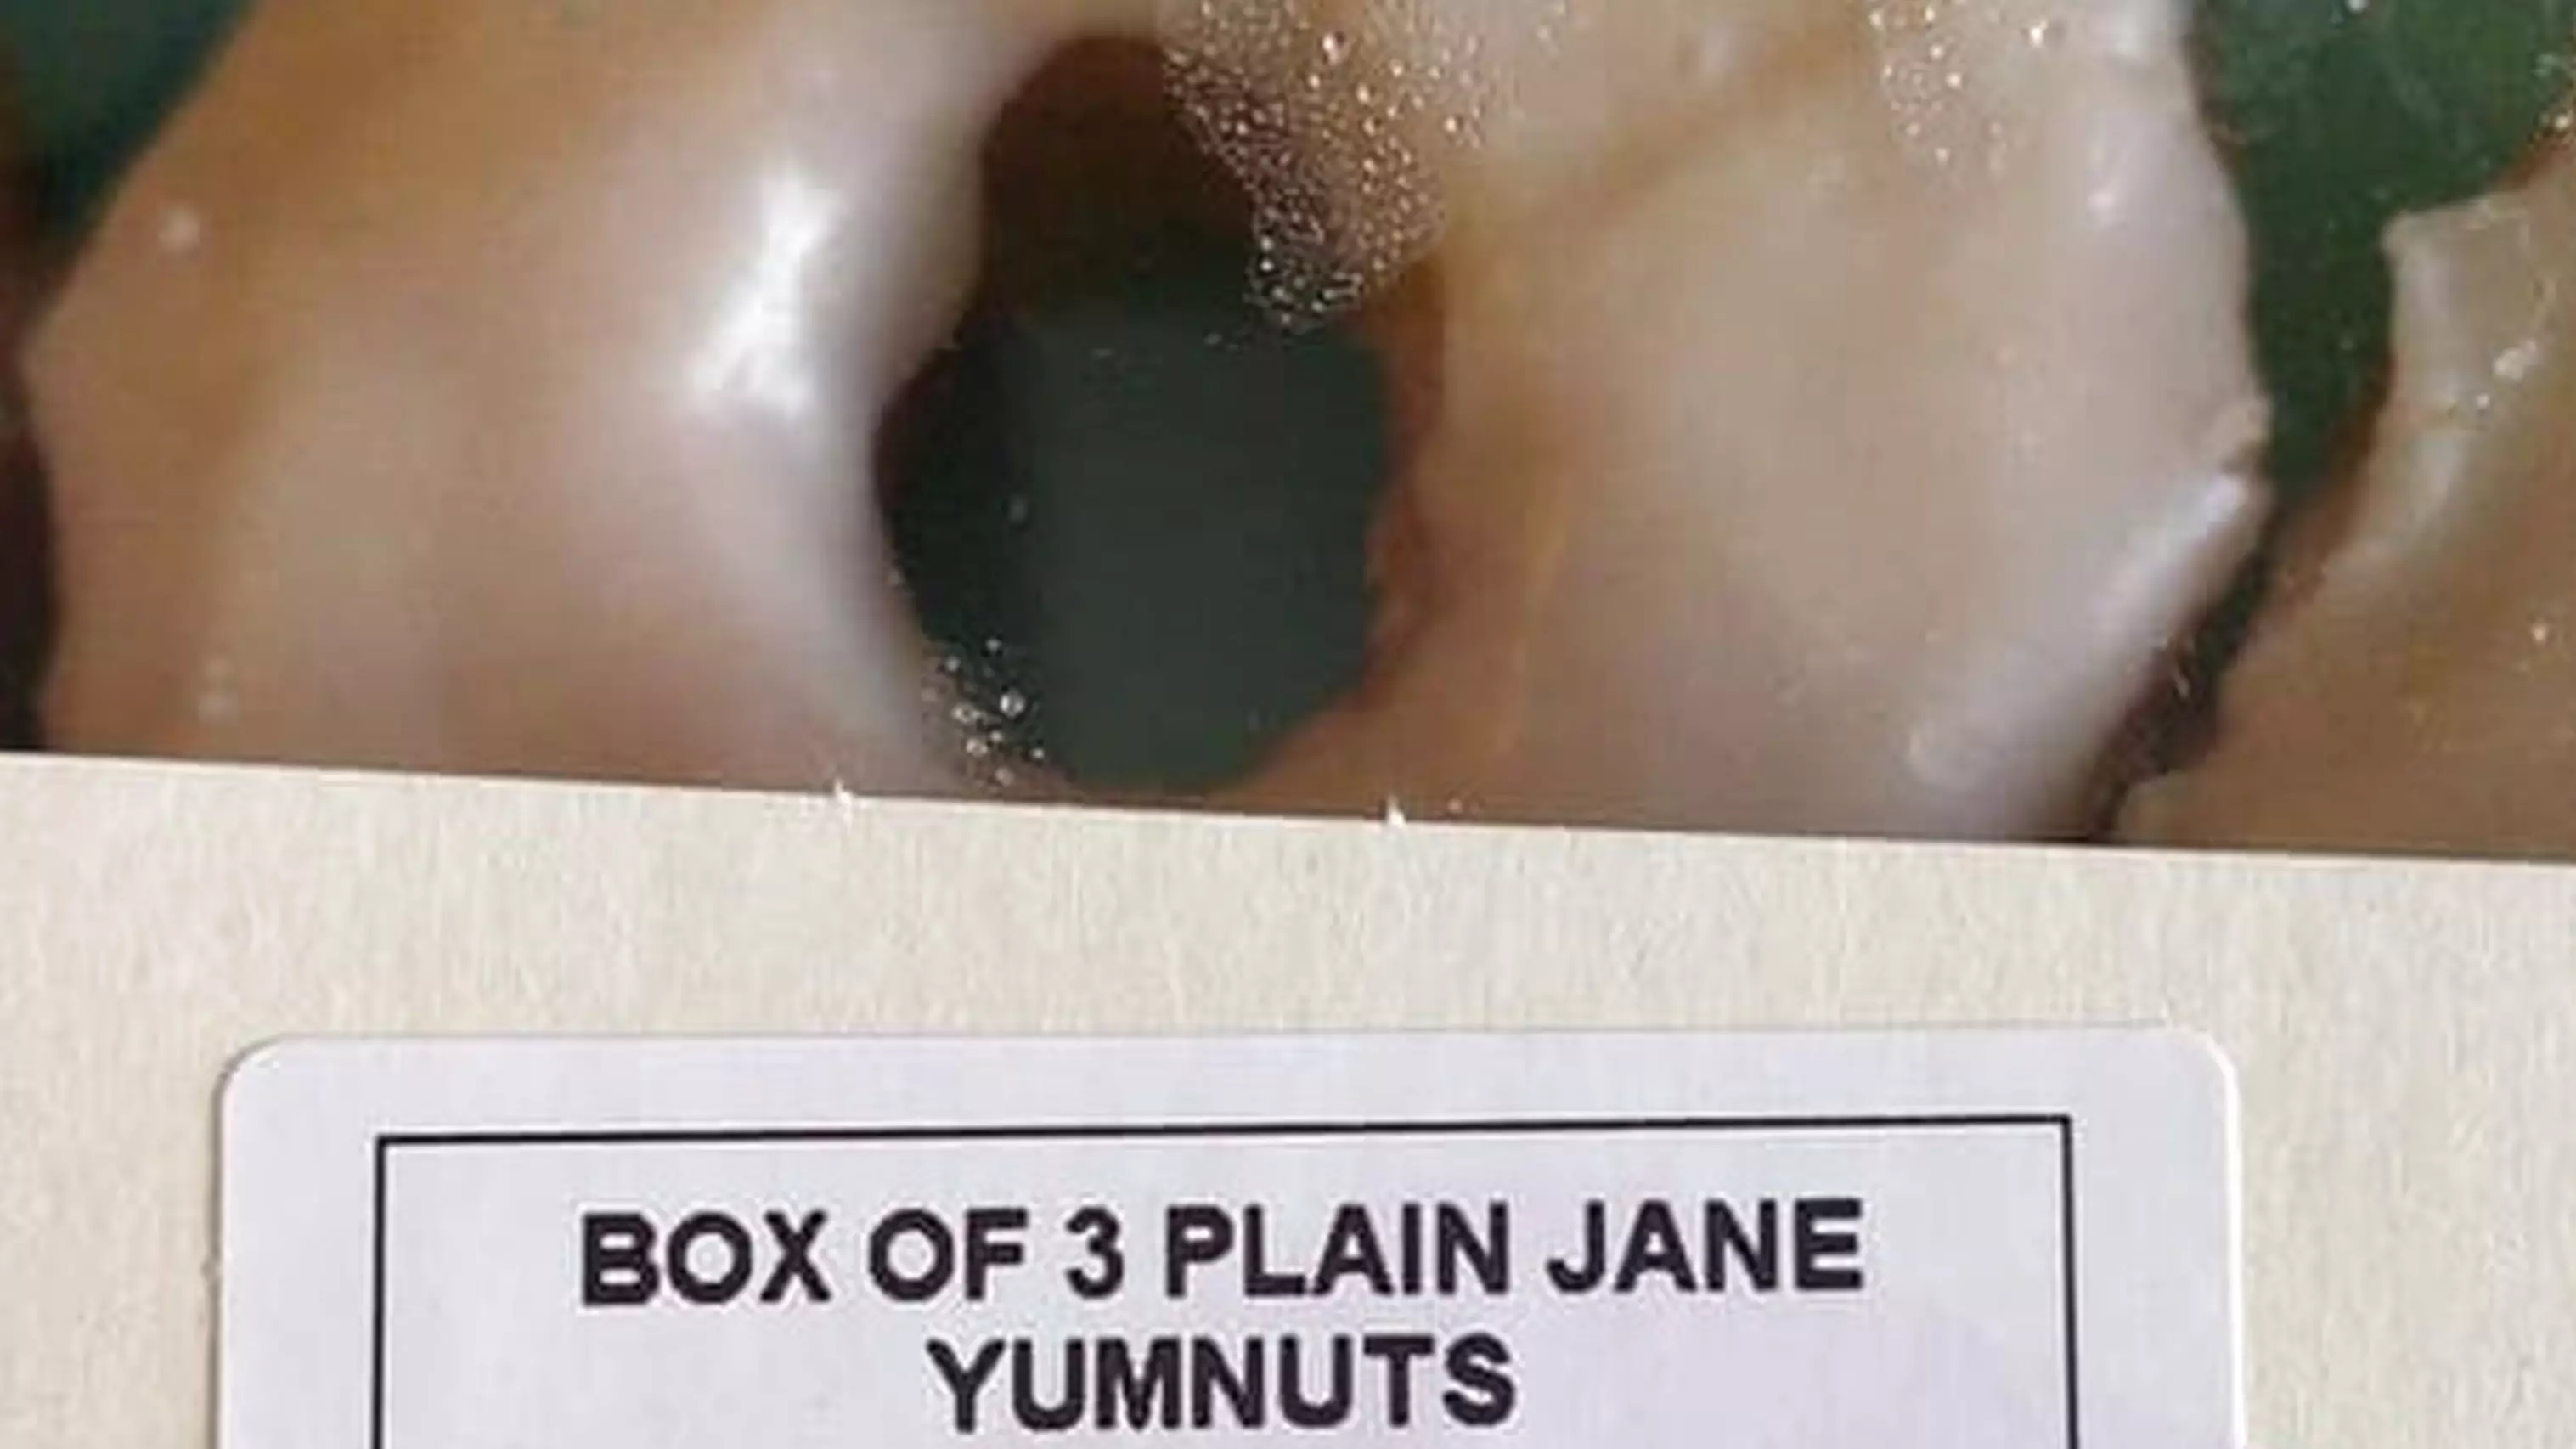 Mum Divides Opinion As She Blasts M&S For ‘Name Calling’ After Spotting ‘Plain Jane’ Pastry